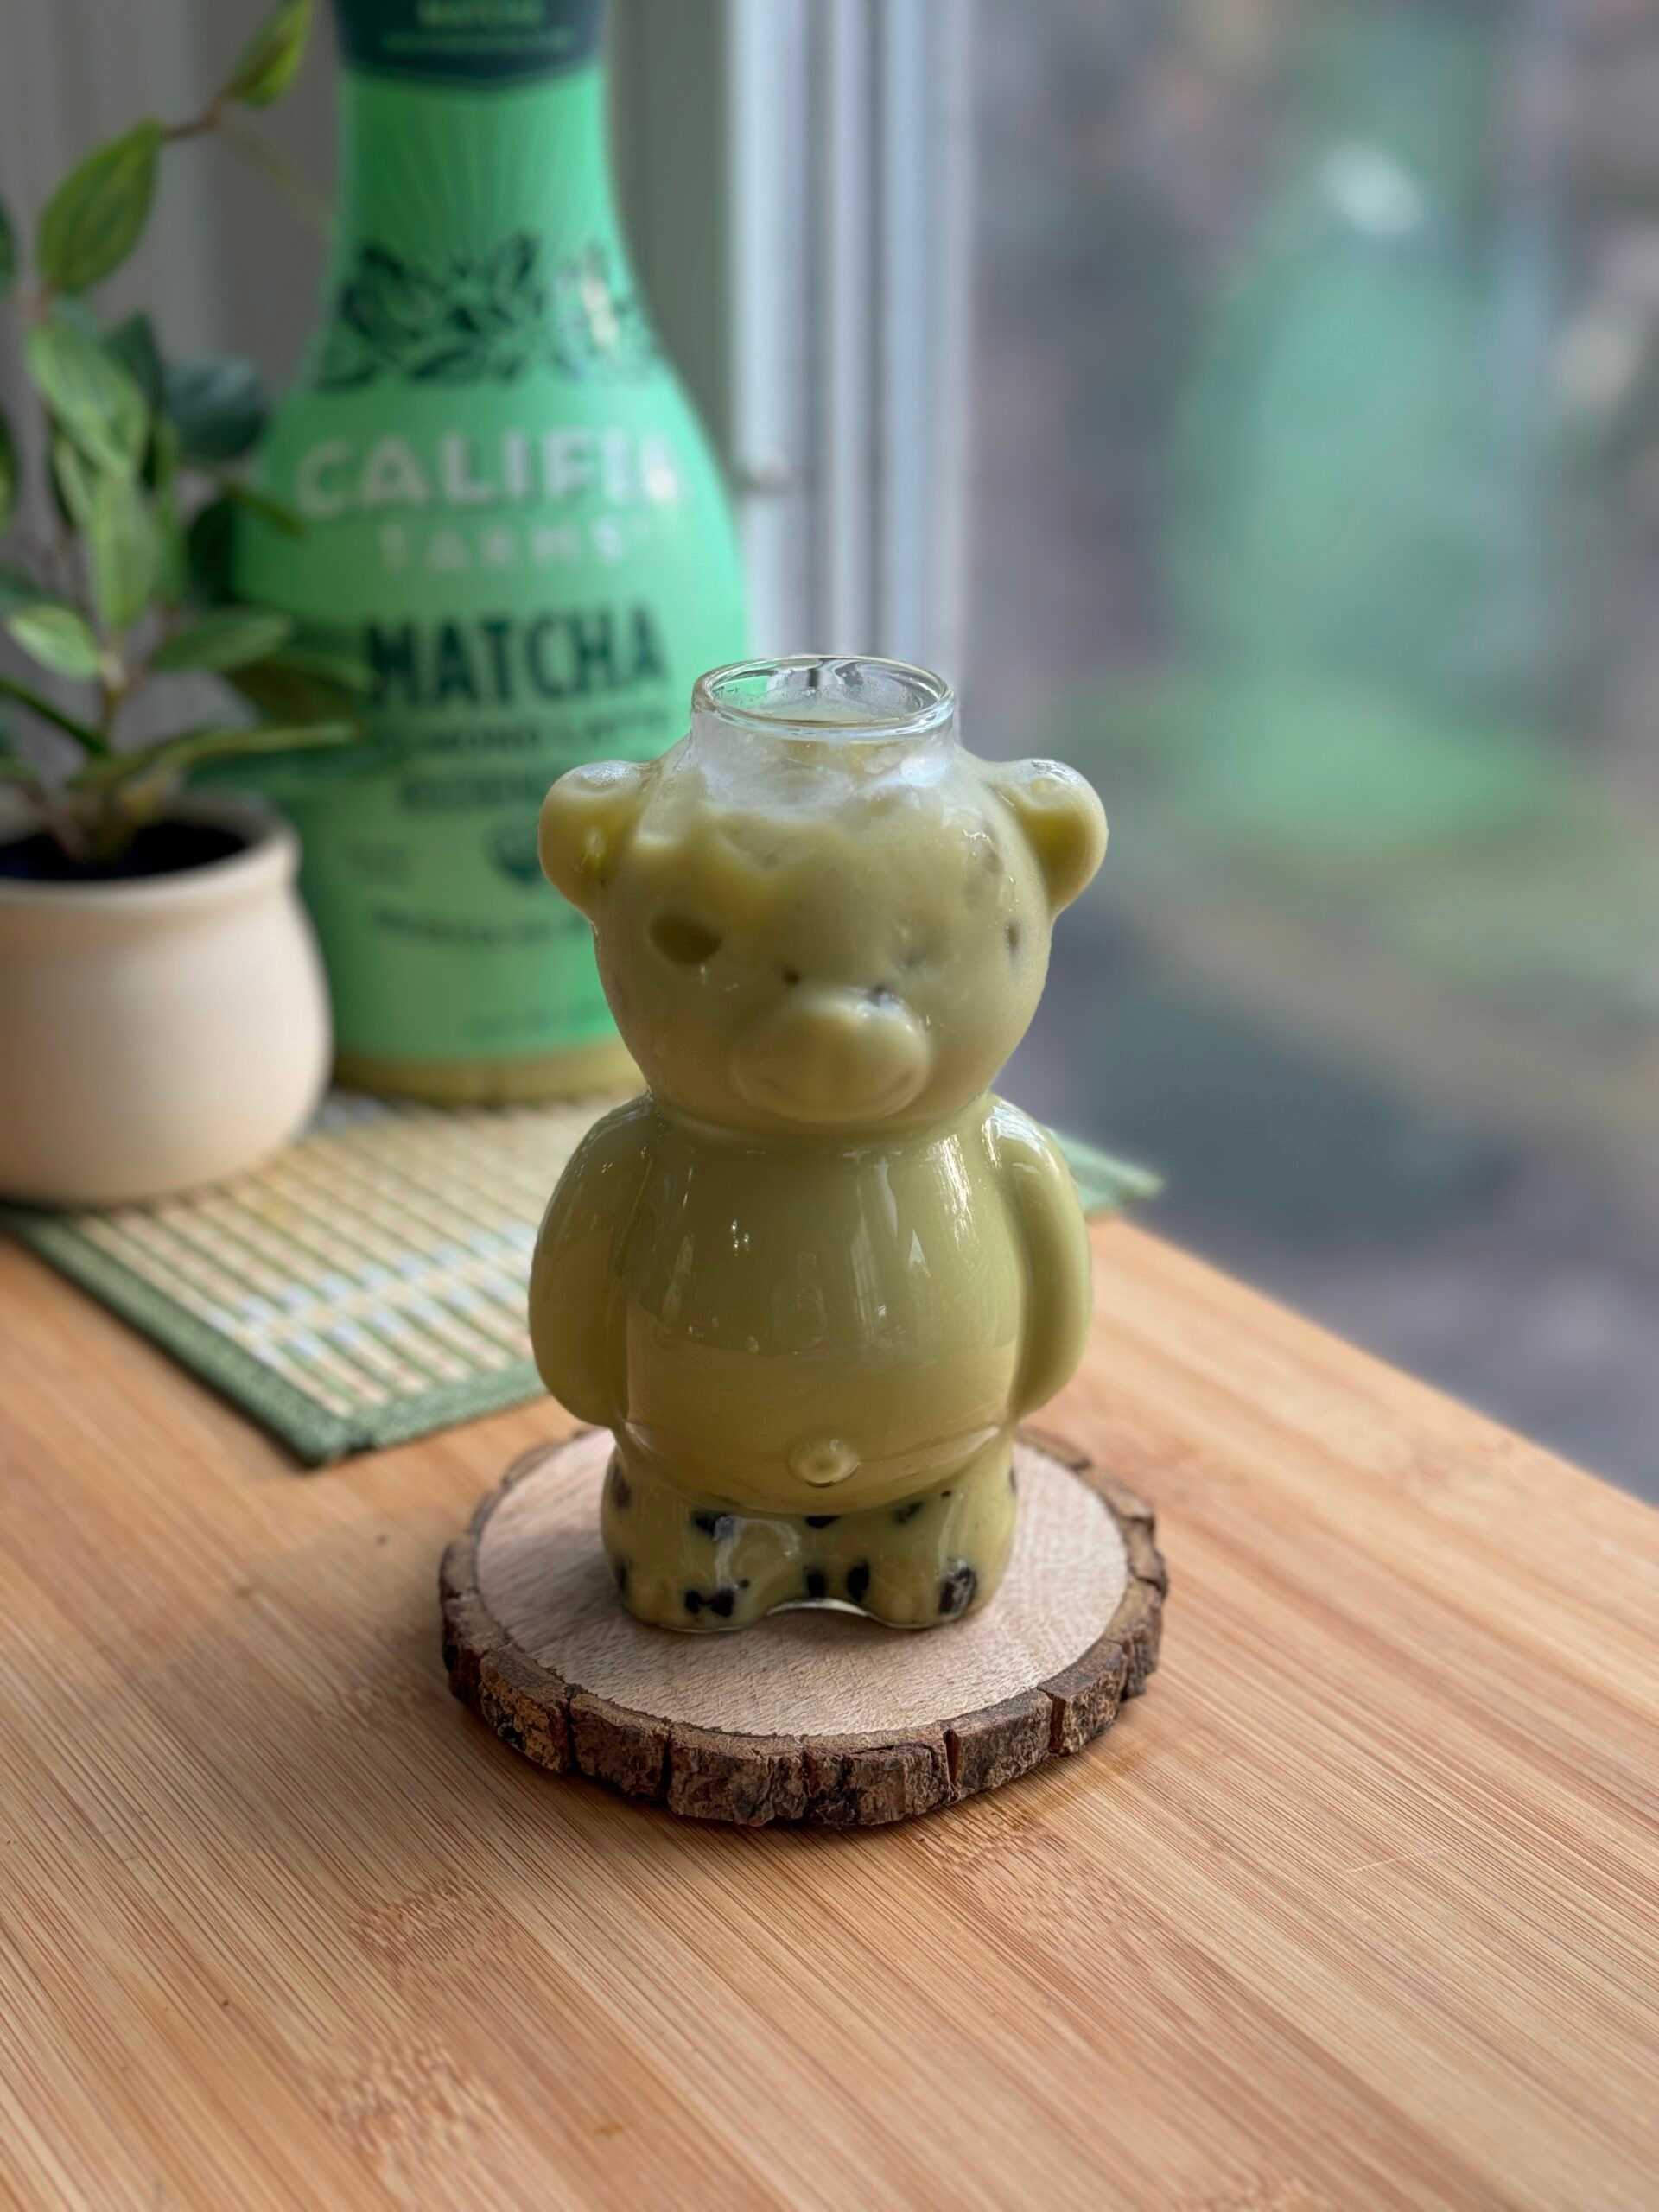 A bear-shaped glass sits at the front of the image, filled with an iced matcha latte with boba pearls